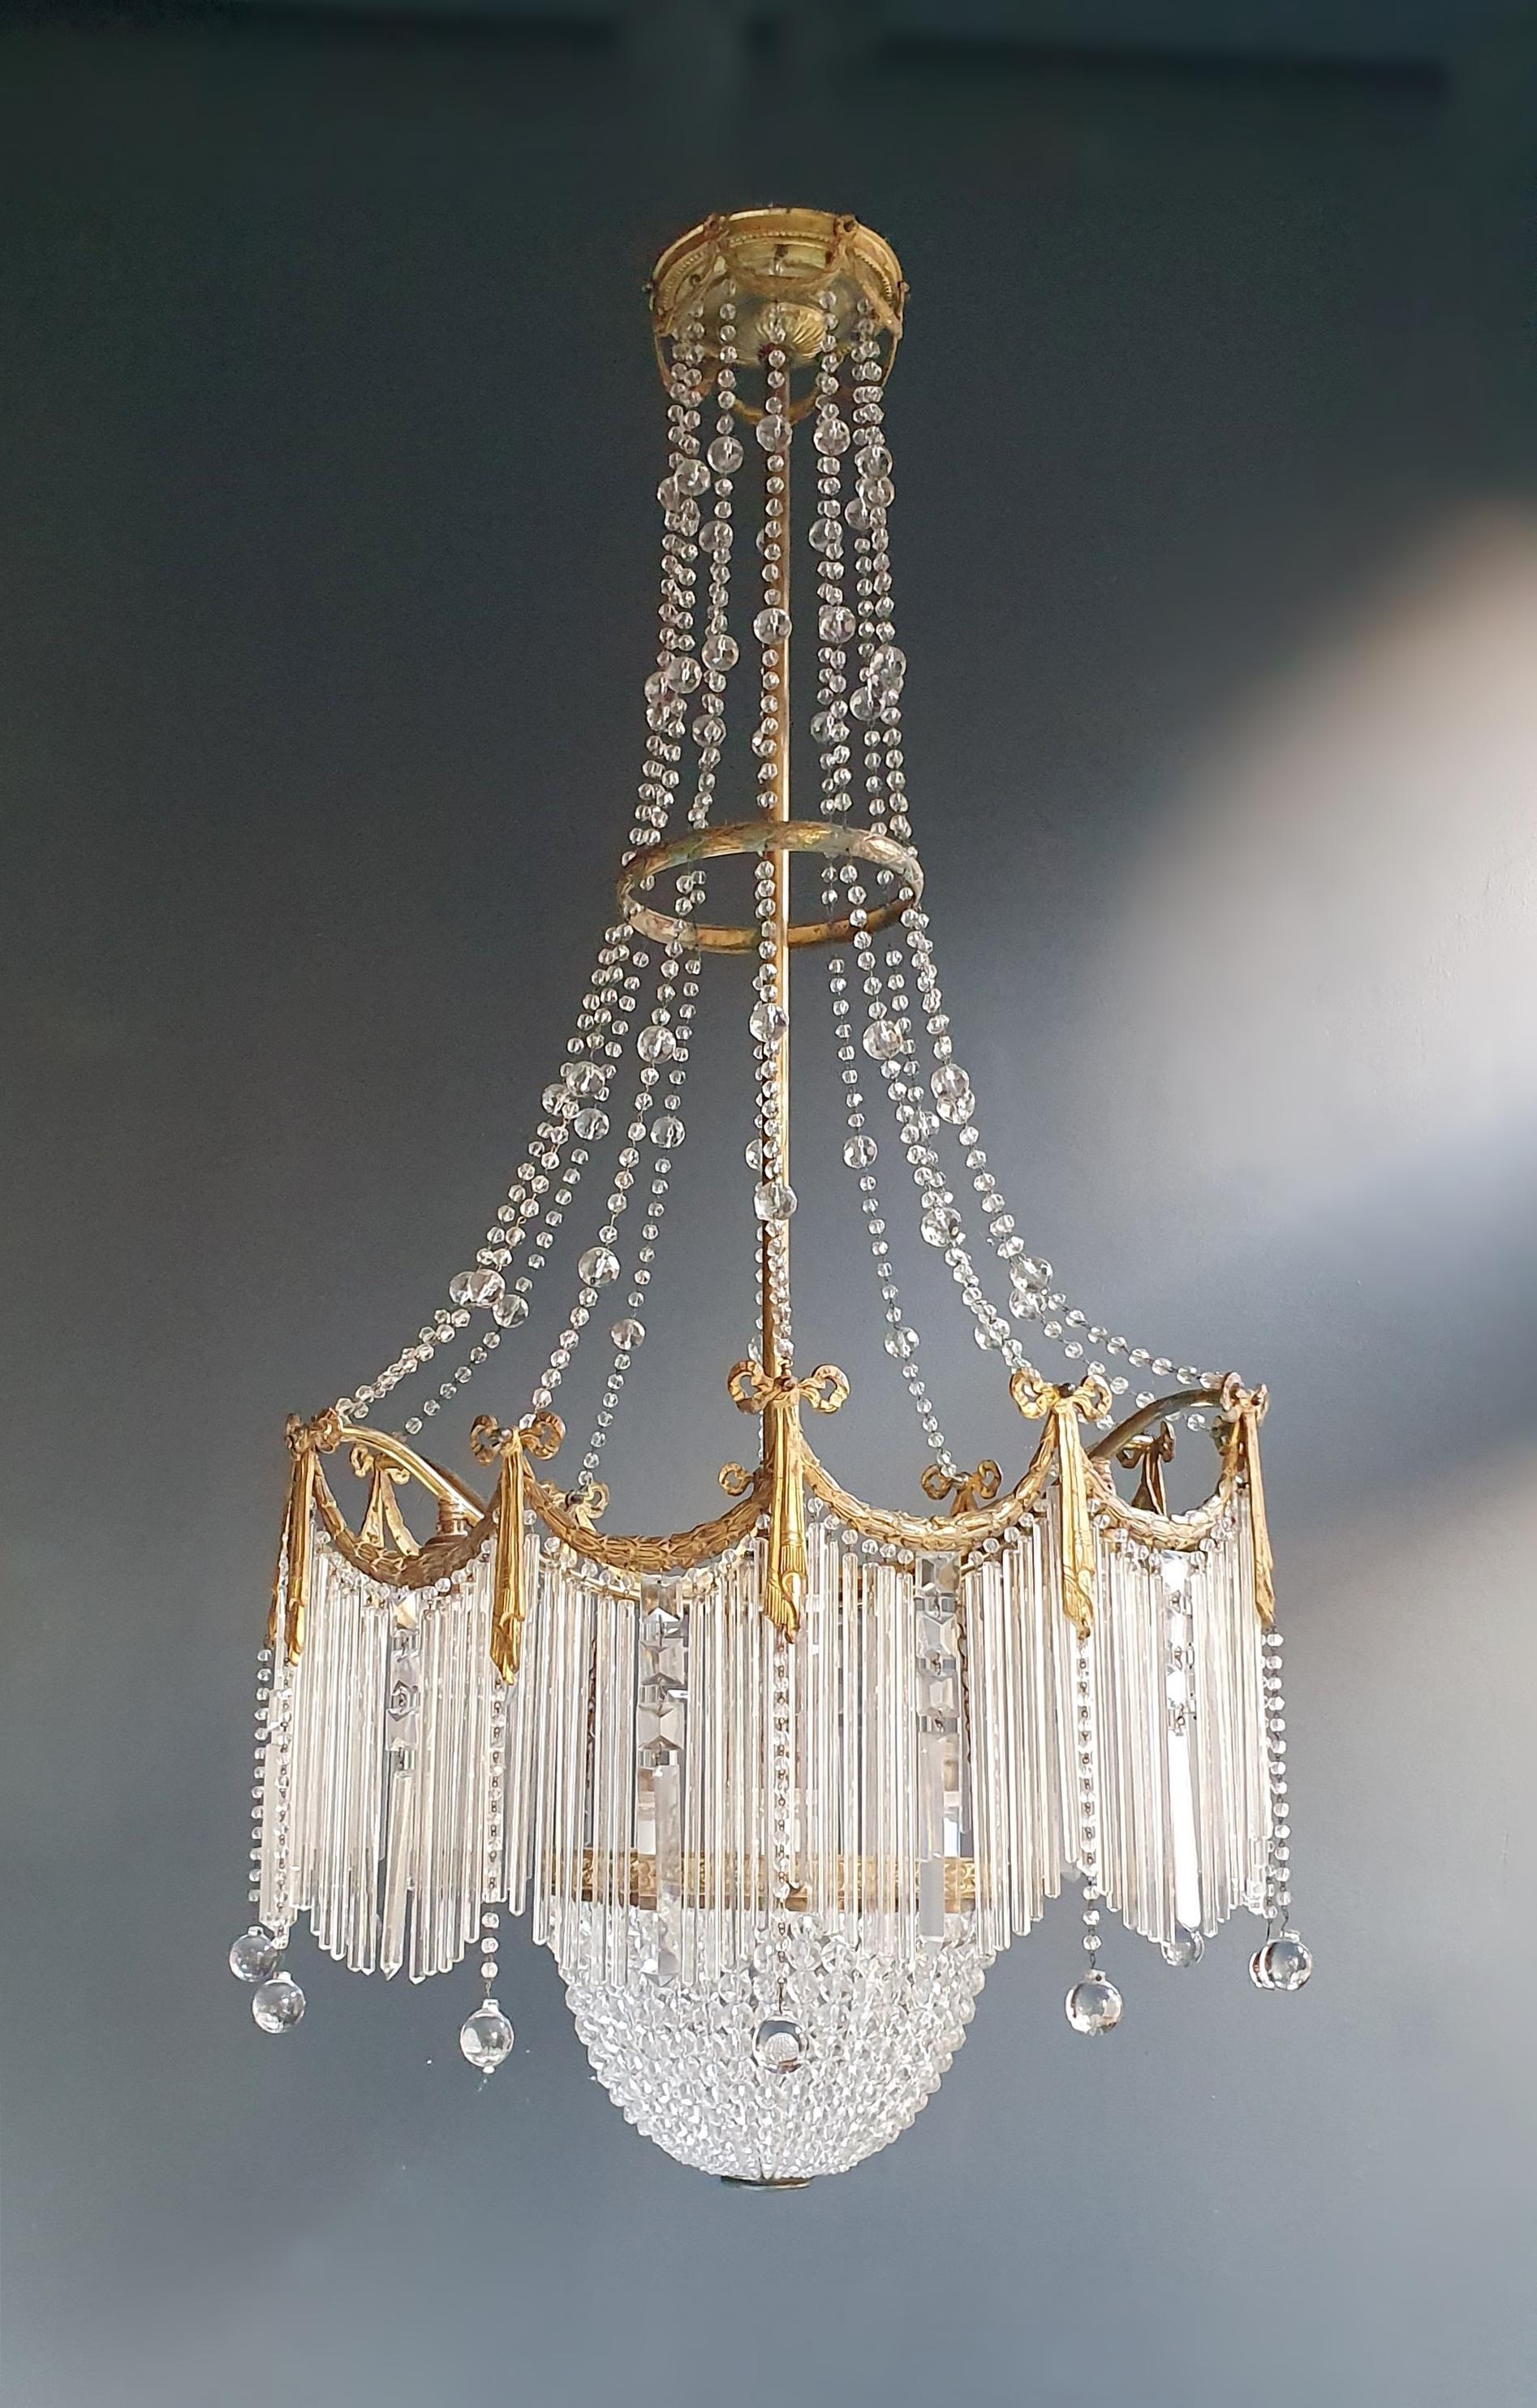 Fine brass crystal chandelier antique ceiling lamp lustre Art Nouveau lamp, 1900.

Measures: Total height 120 cm, diameter 60 cm. Weight (approximately): 10kg.

Number of lights: 7-light bulb sockets: E28
material: Brass, glass, crystal

New